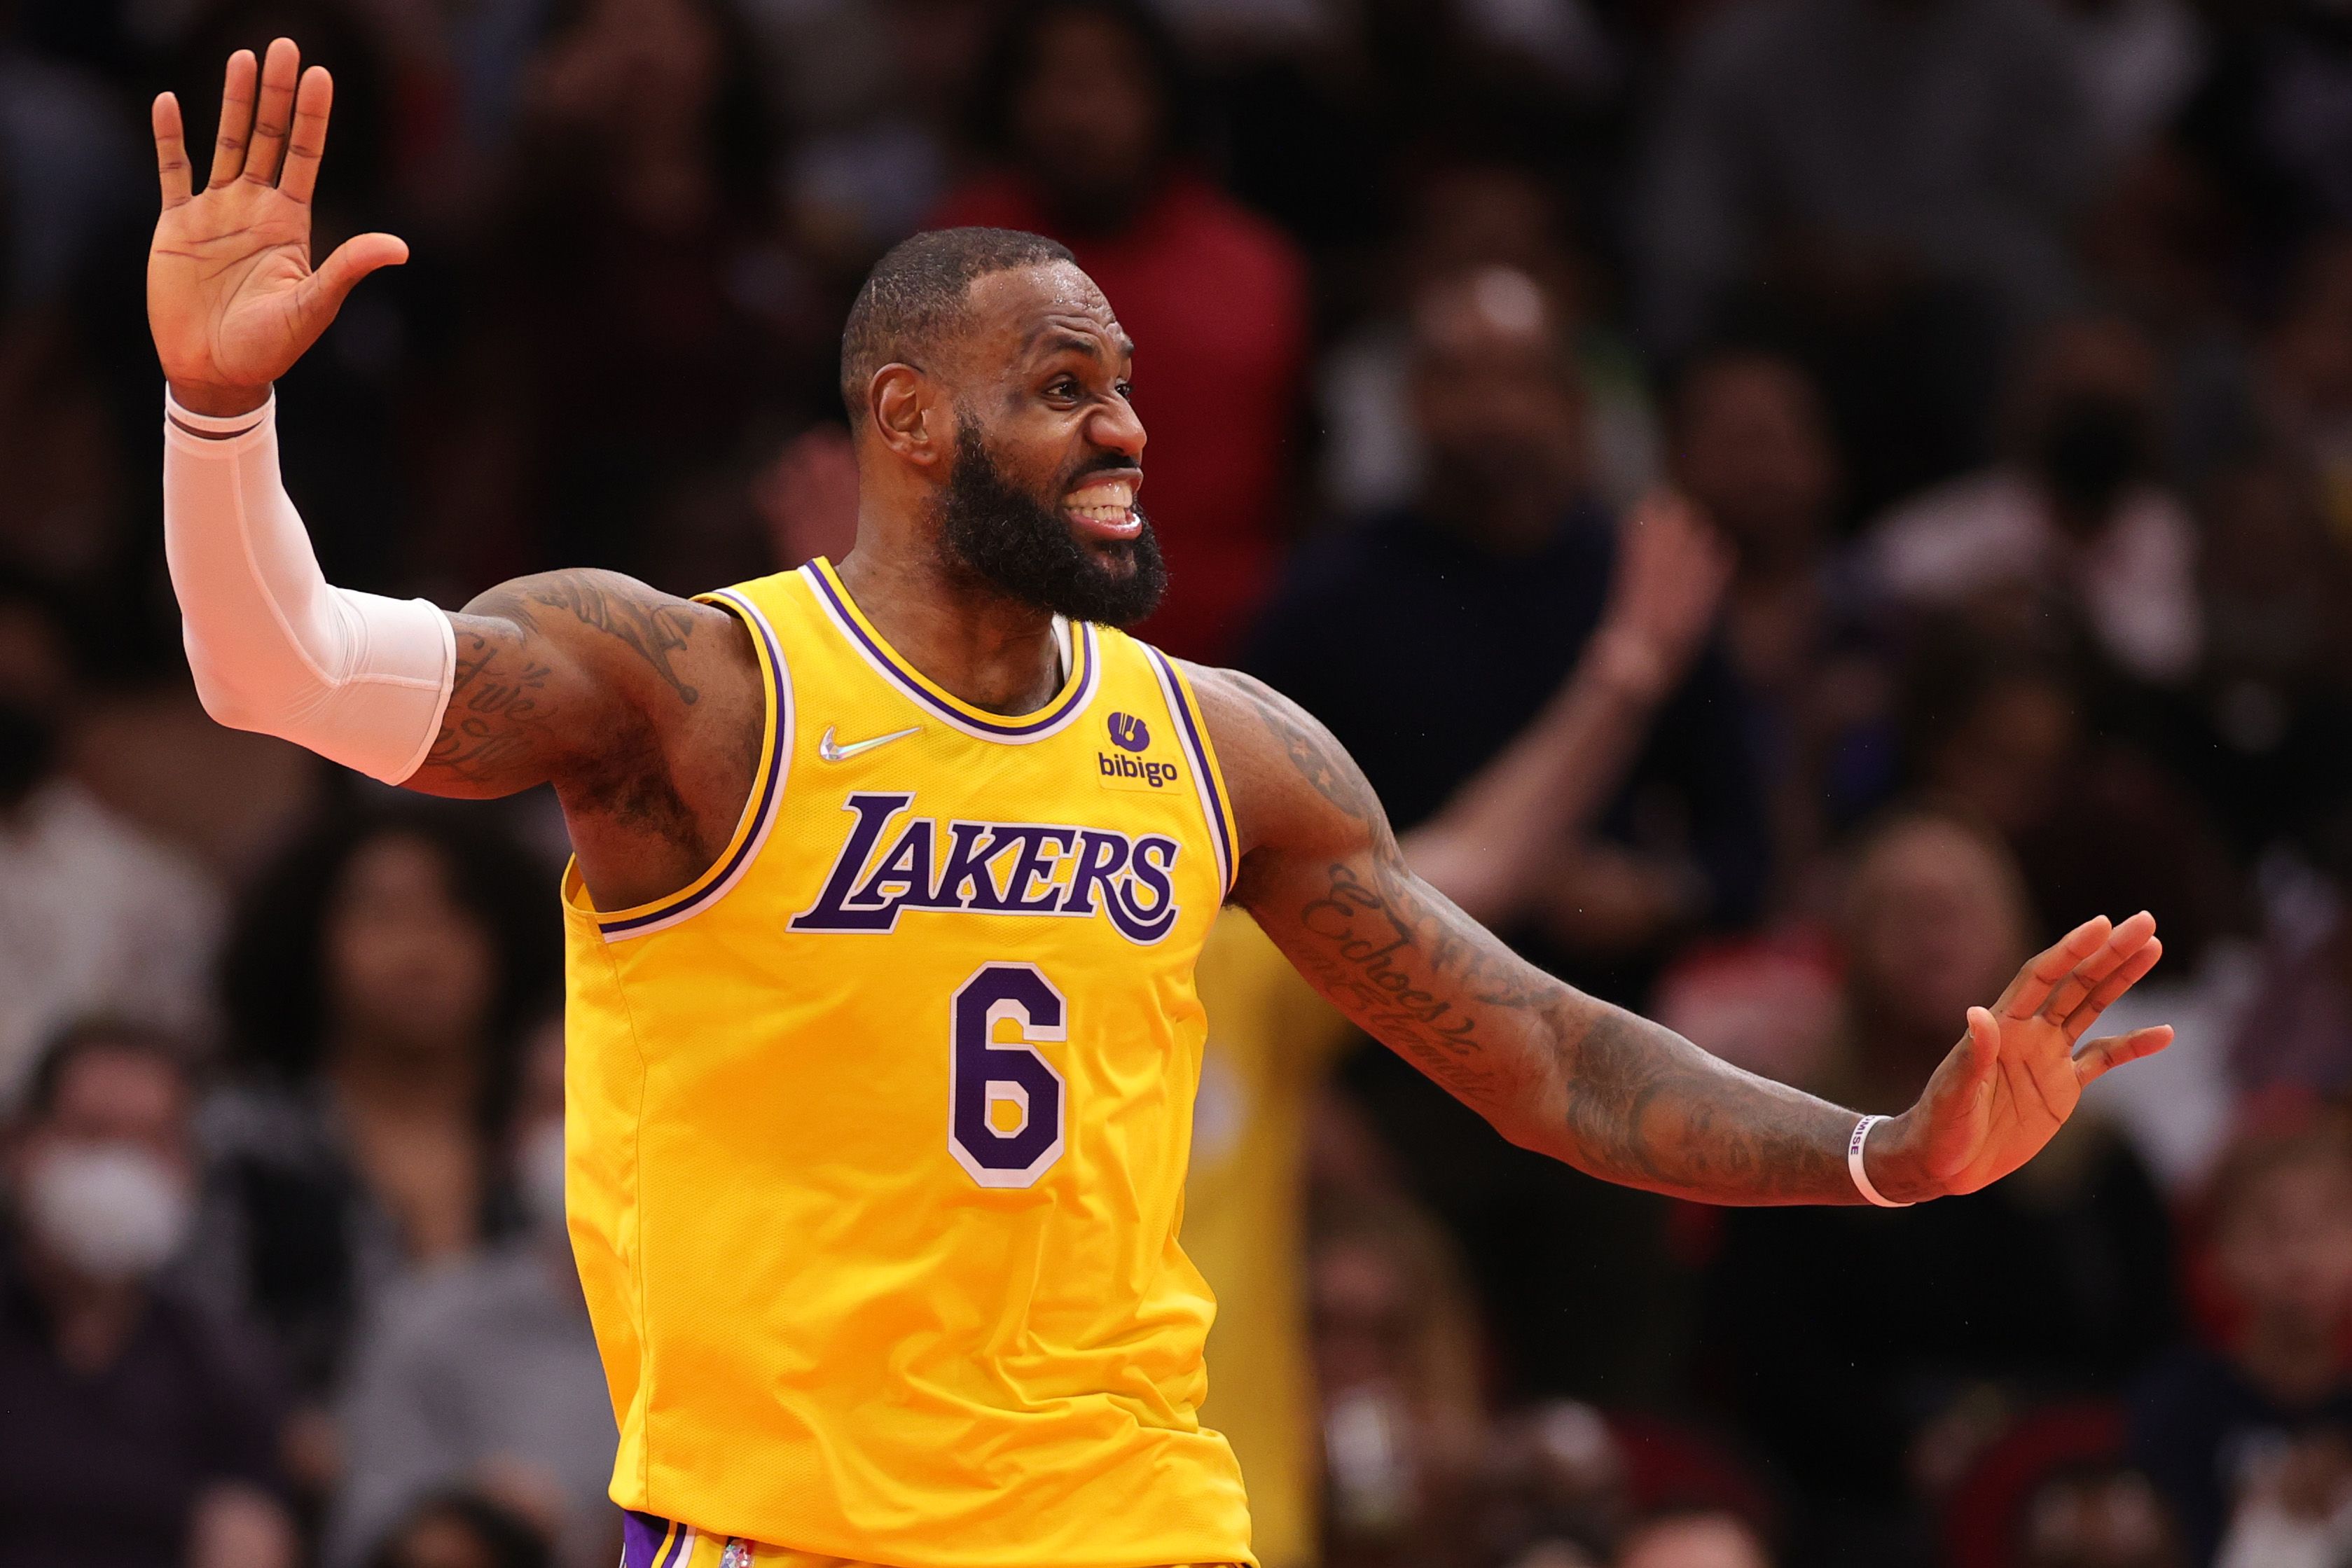 Los Angeles Lakers: LeBron James for MVP in his 17th season?